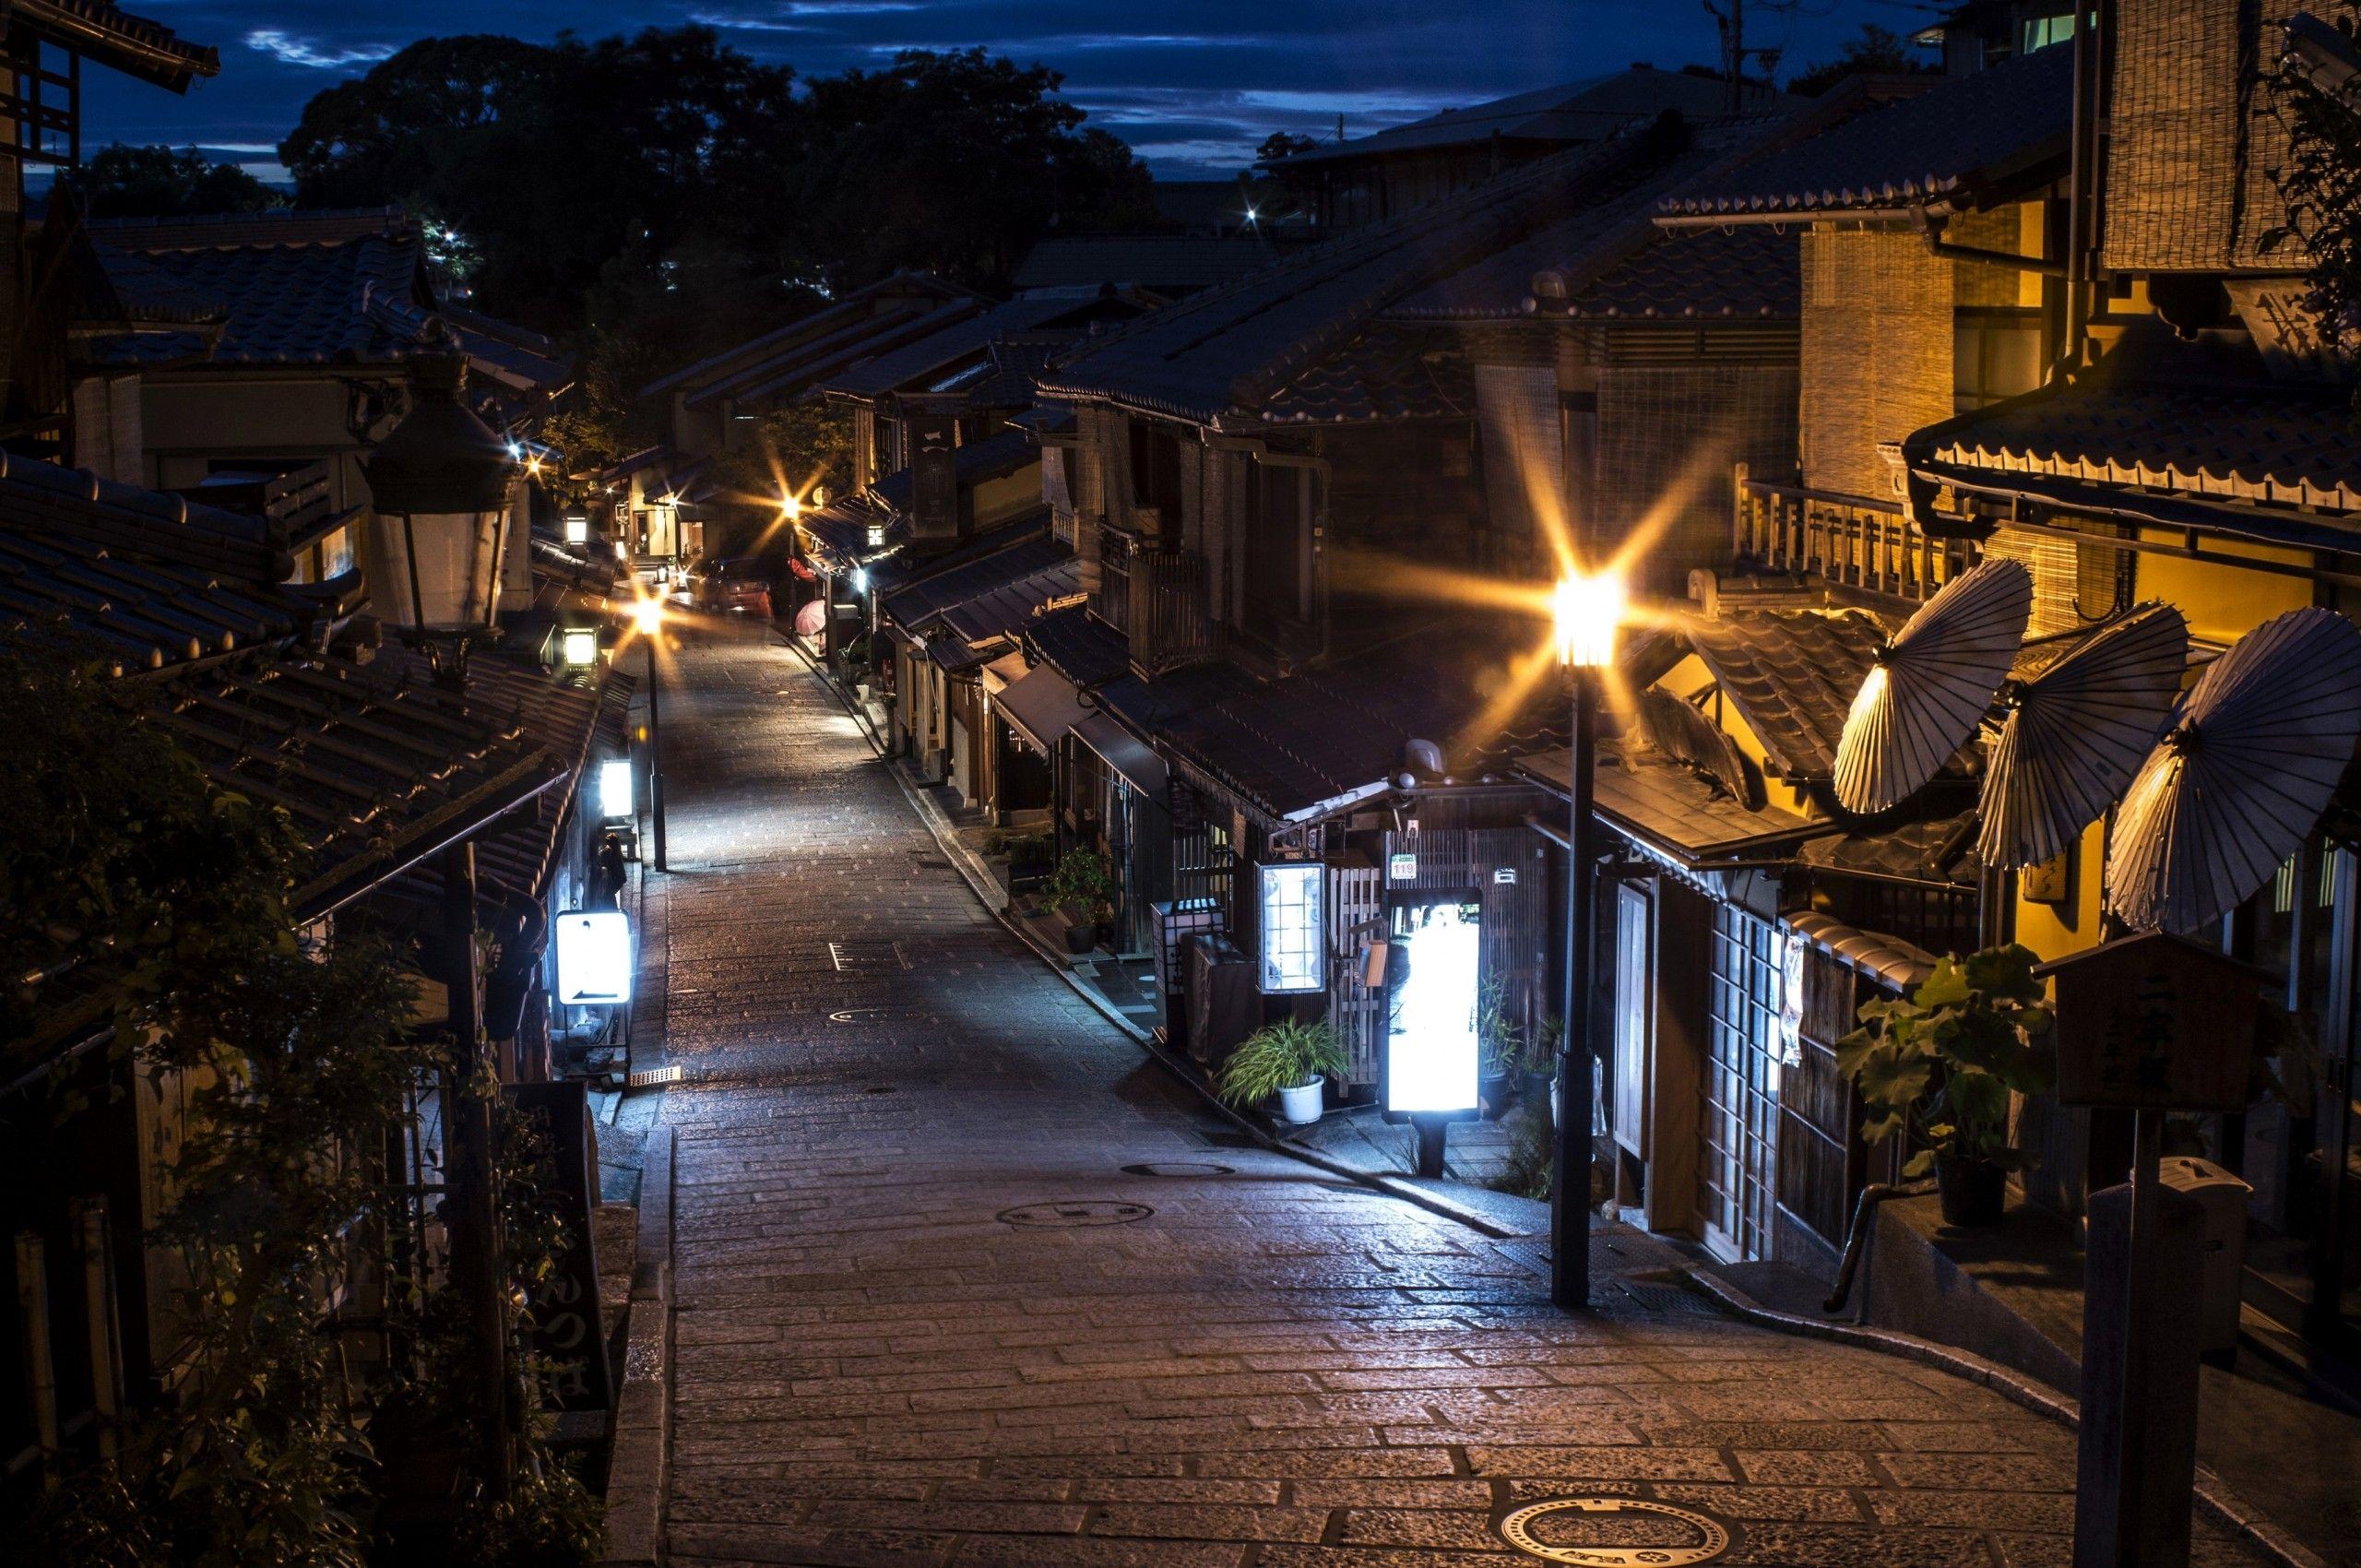 Download 2560x1700 Japan Traditional Houses, Street, Light, Night